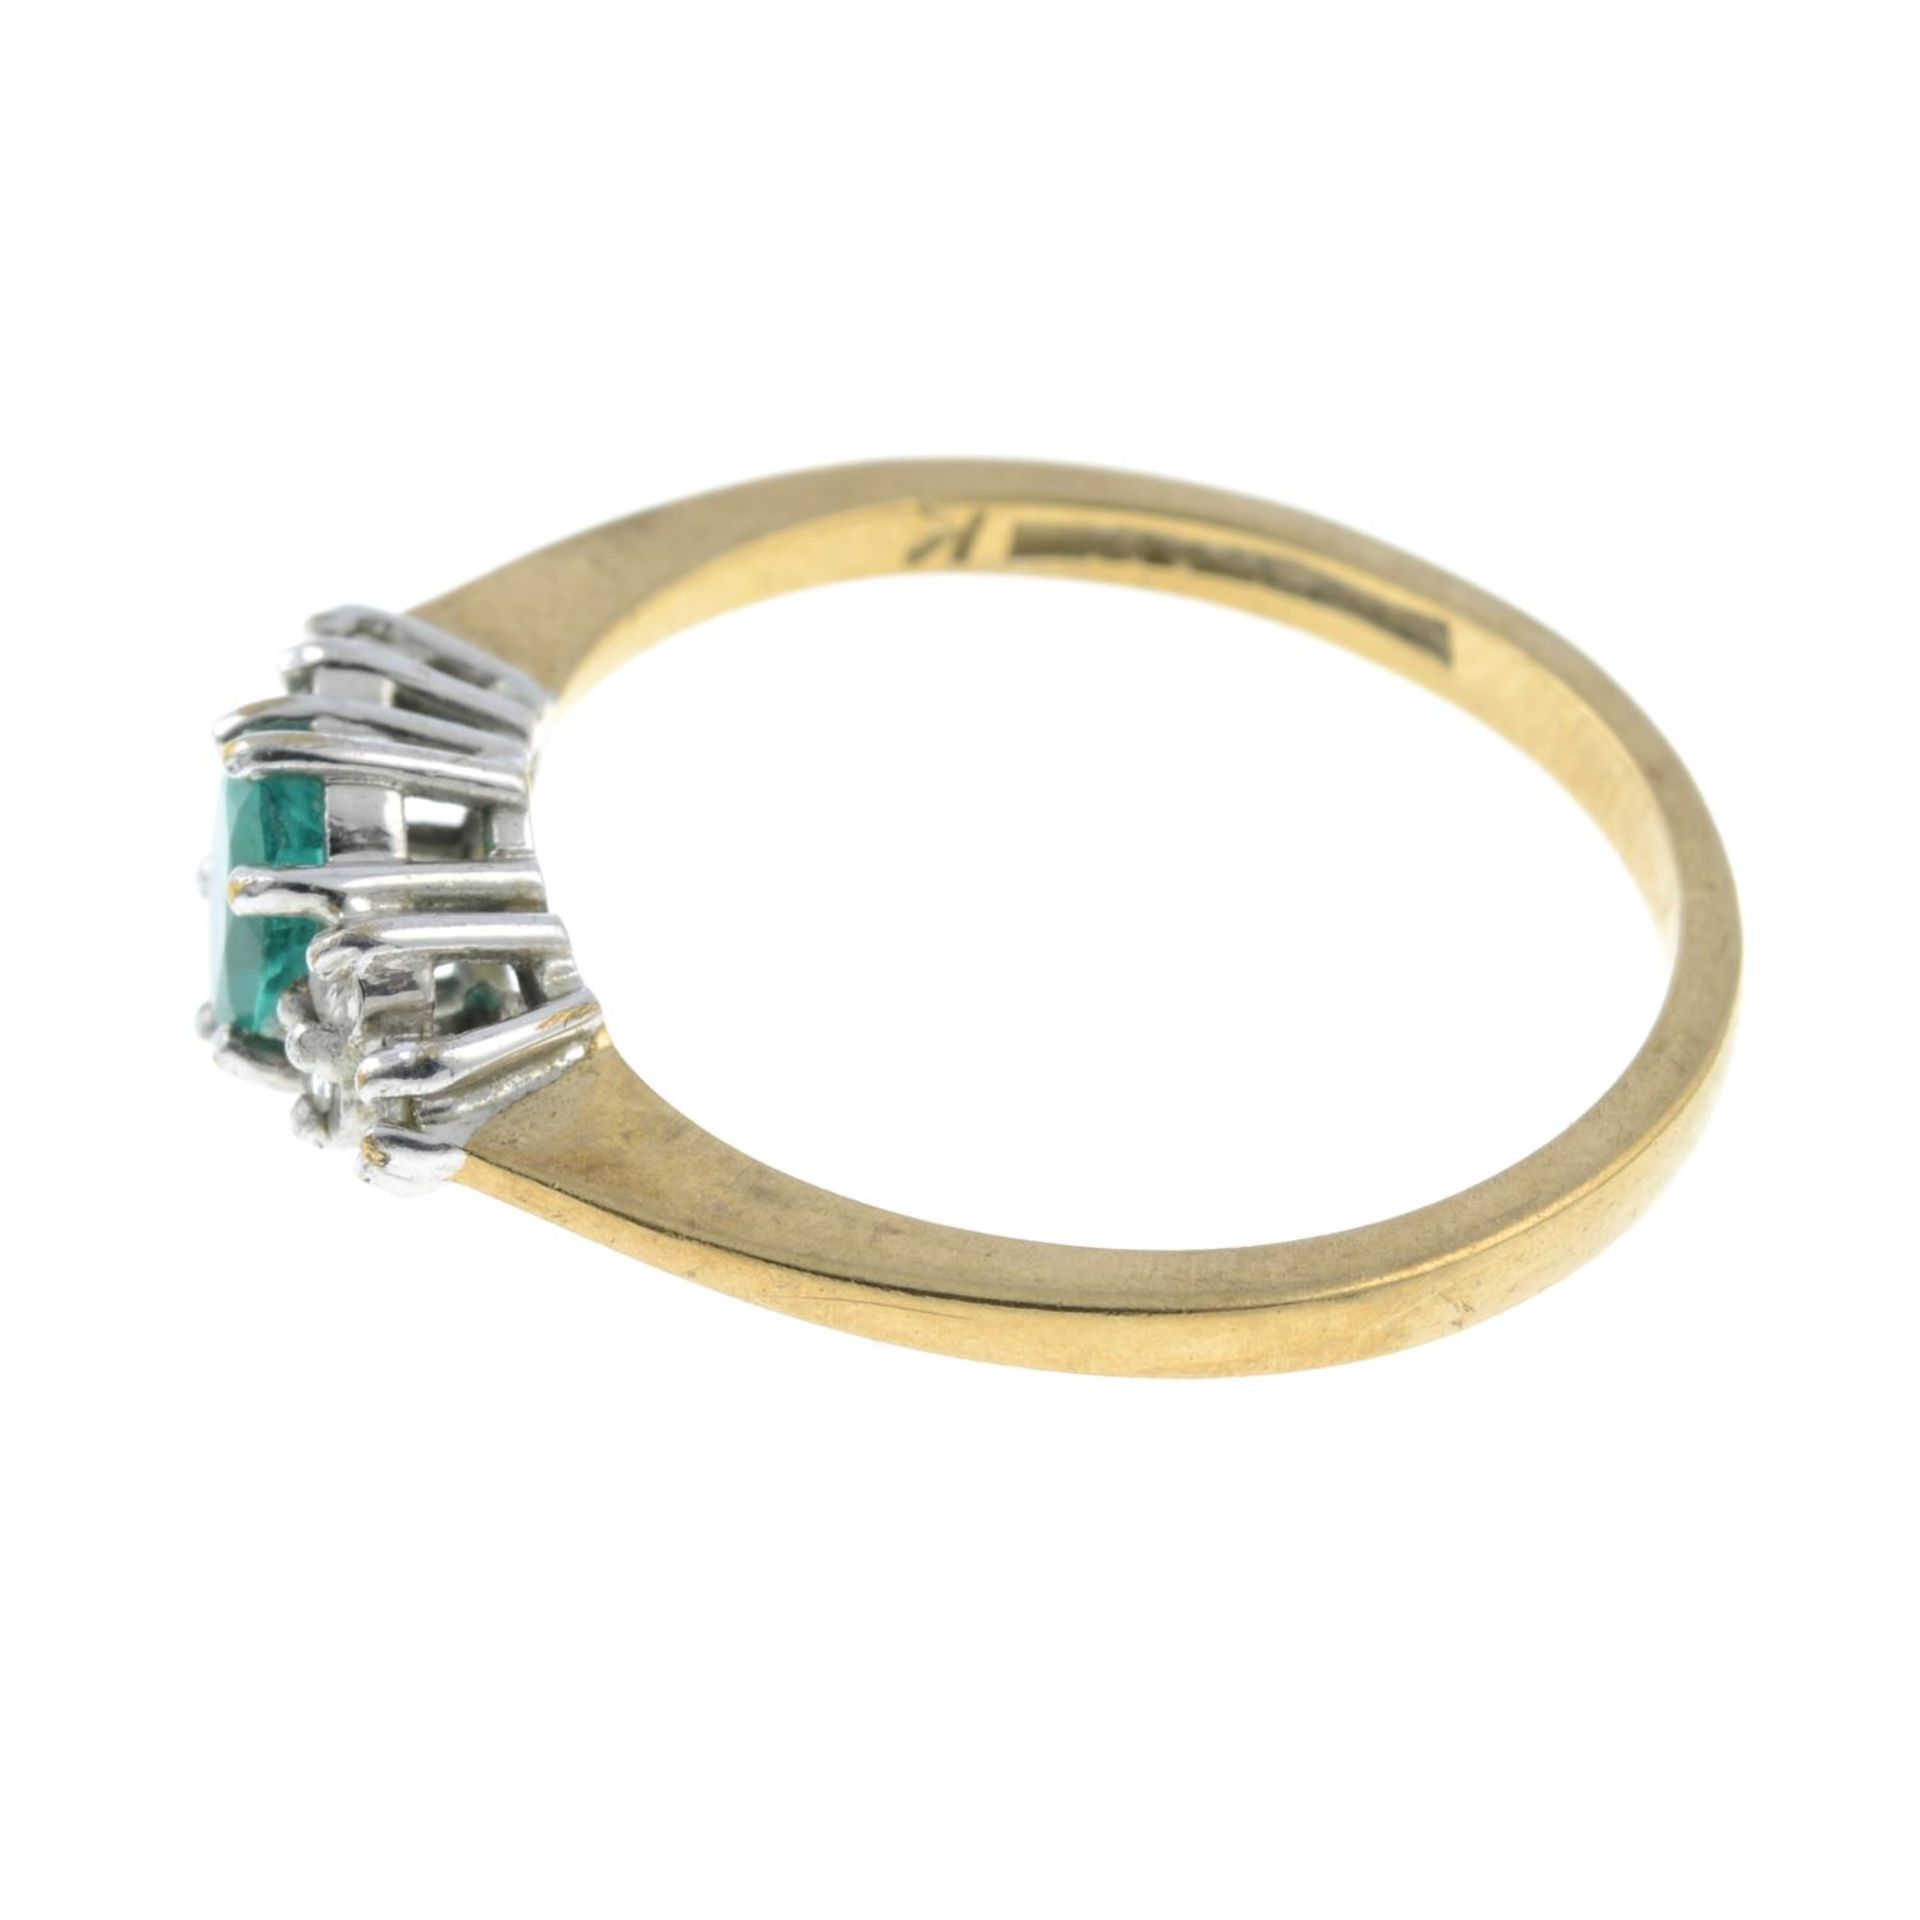 A 9ct gold emerald and diamond ring. - Image 2 of 3